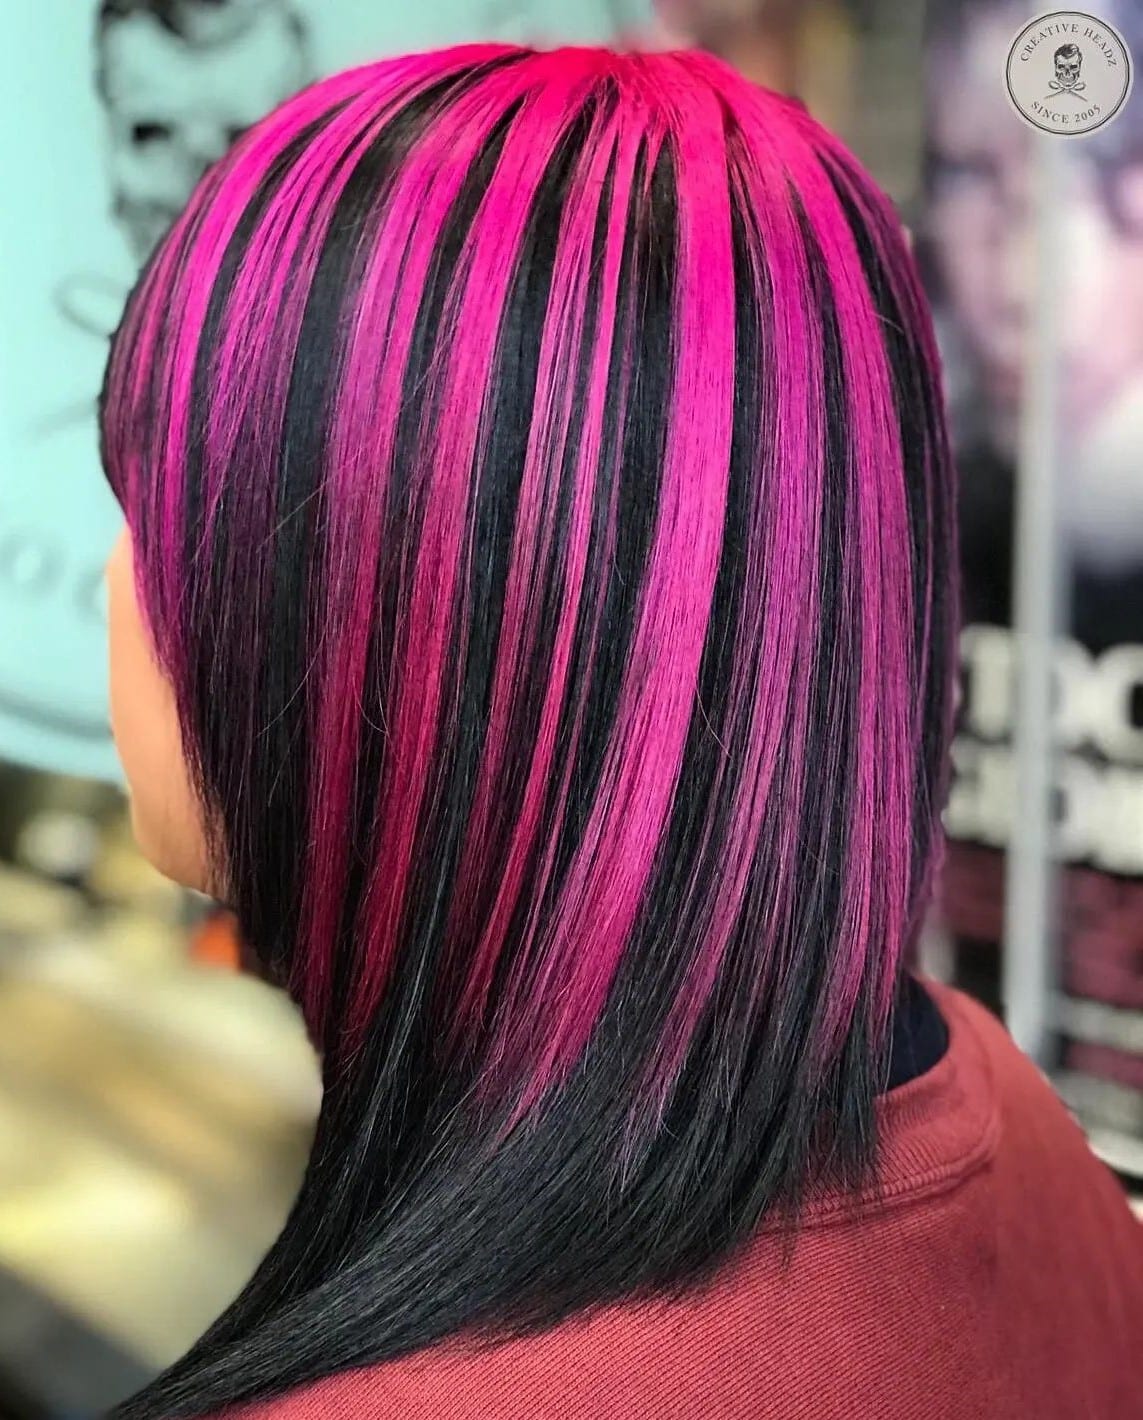 Pink and Black Hair with Black Tips